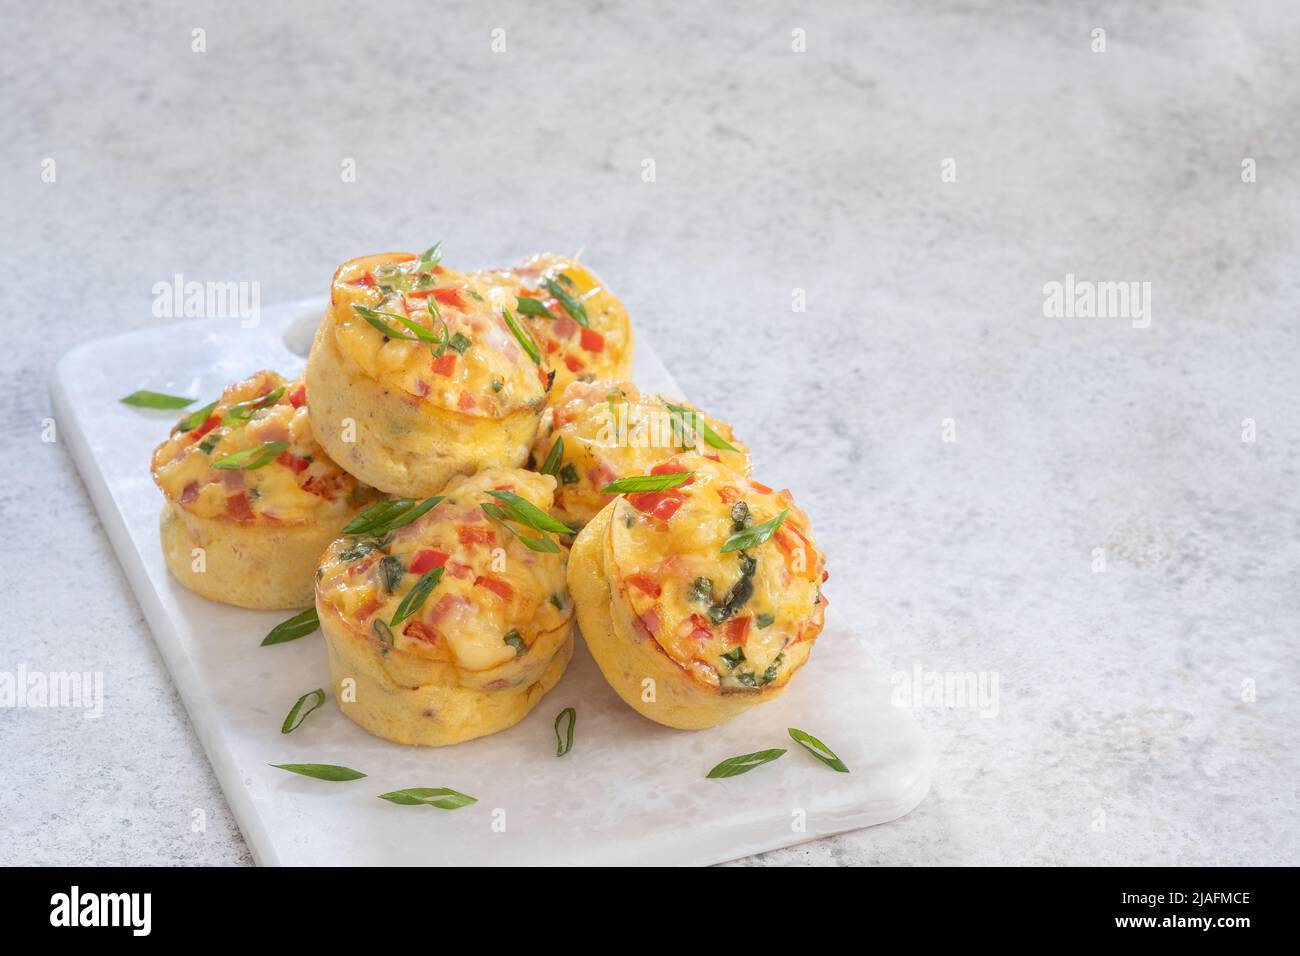 Delicious egg muffins with ham, cheese and vegetables Stock Photo